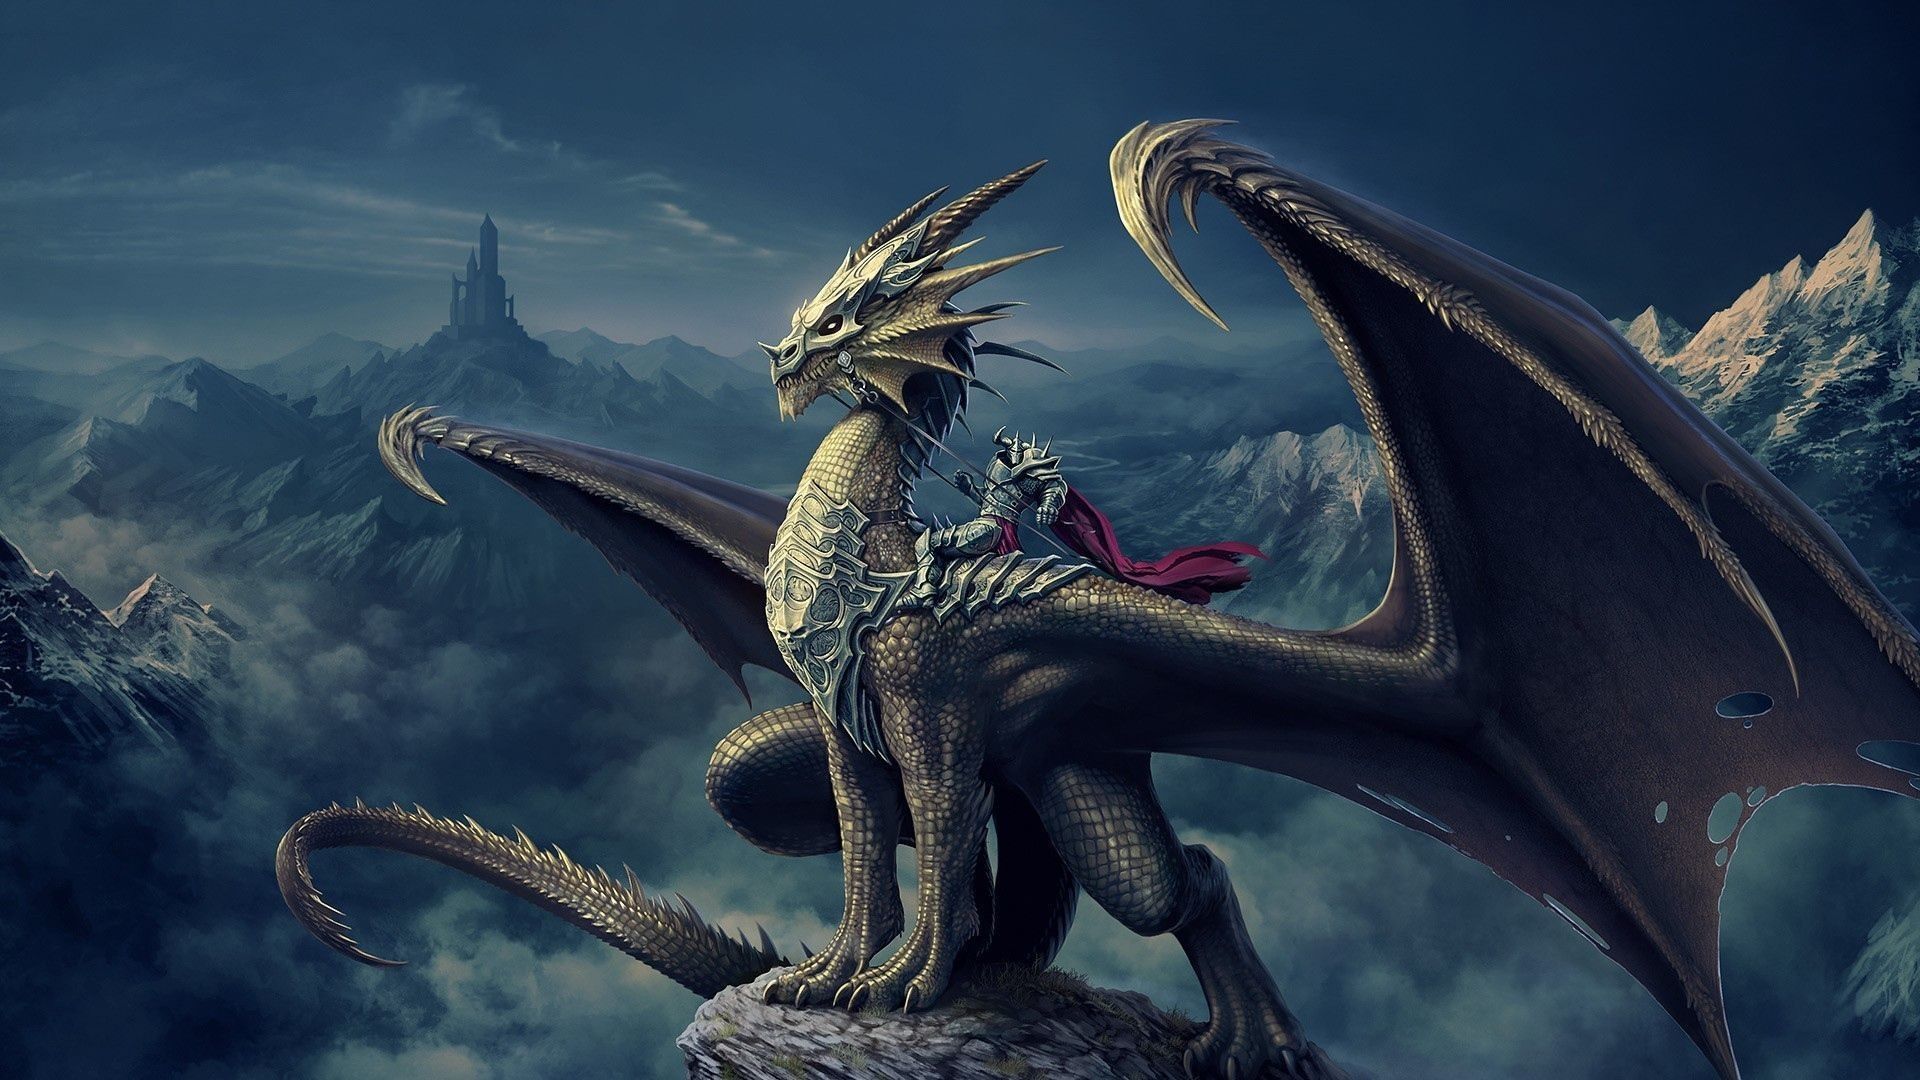 Cool Dragons Wallpaper 59 pictures